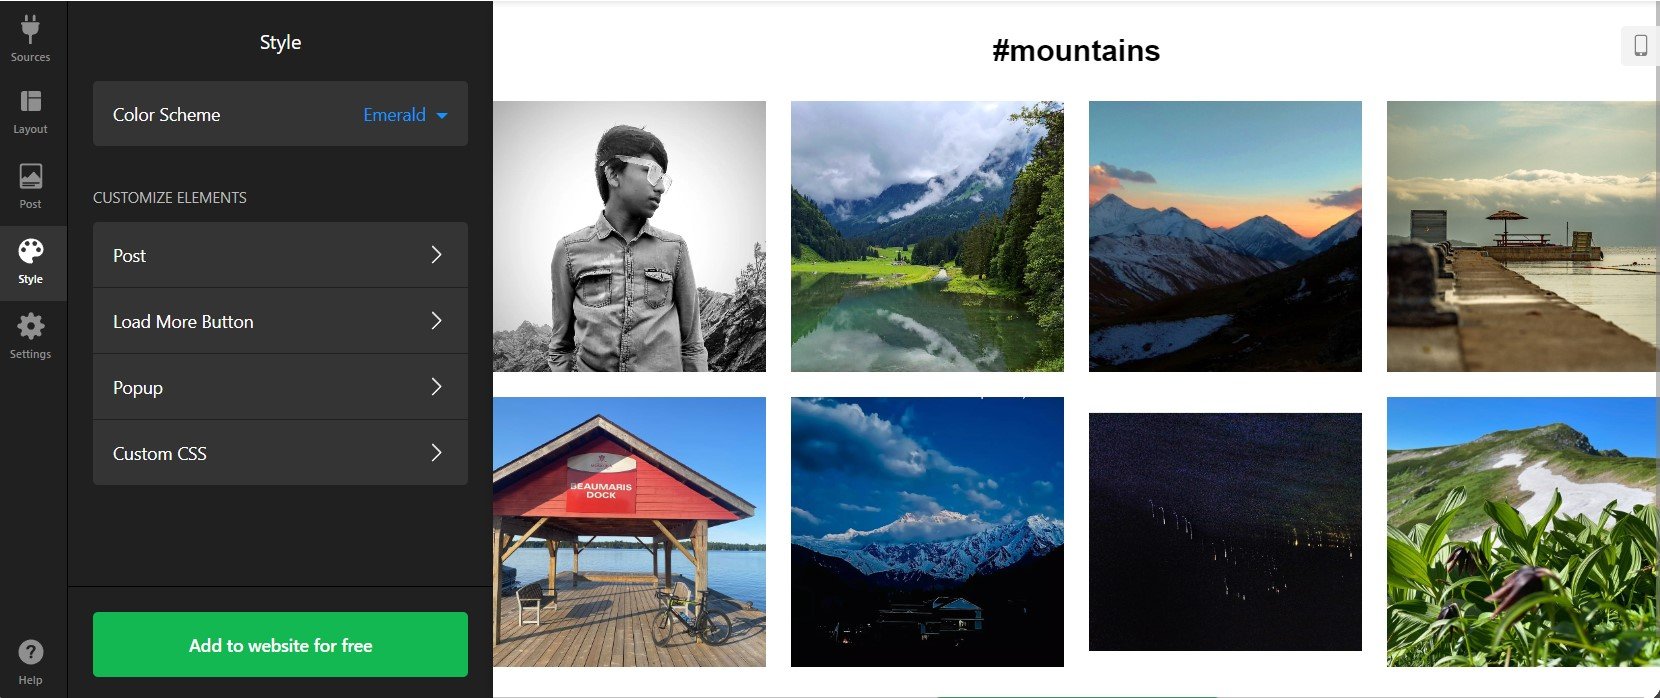 Embed Instagram Feed: add your style